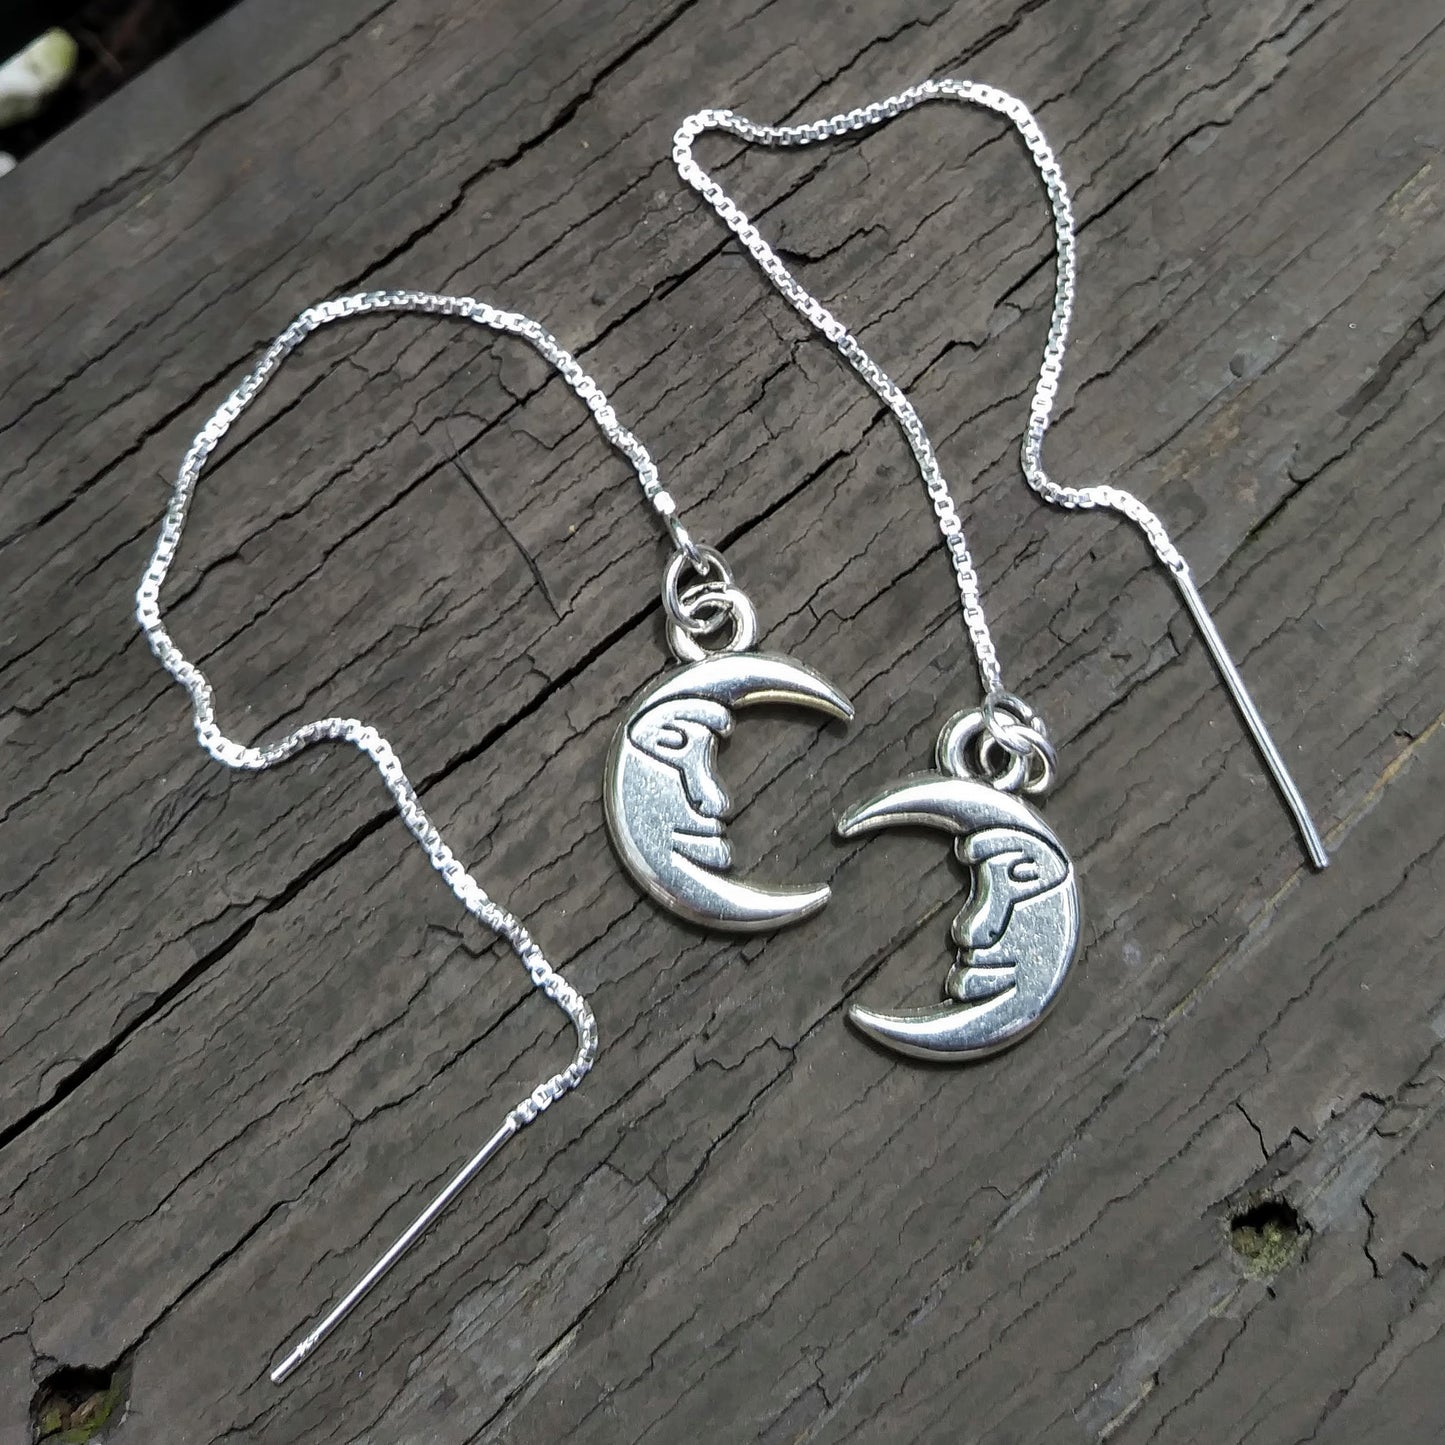 Man in the Moon Threader Earrings - 4 inch 0.925 Sterling Silver Threads